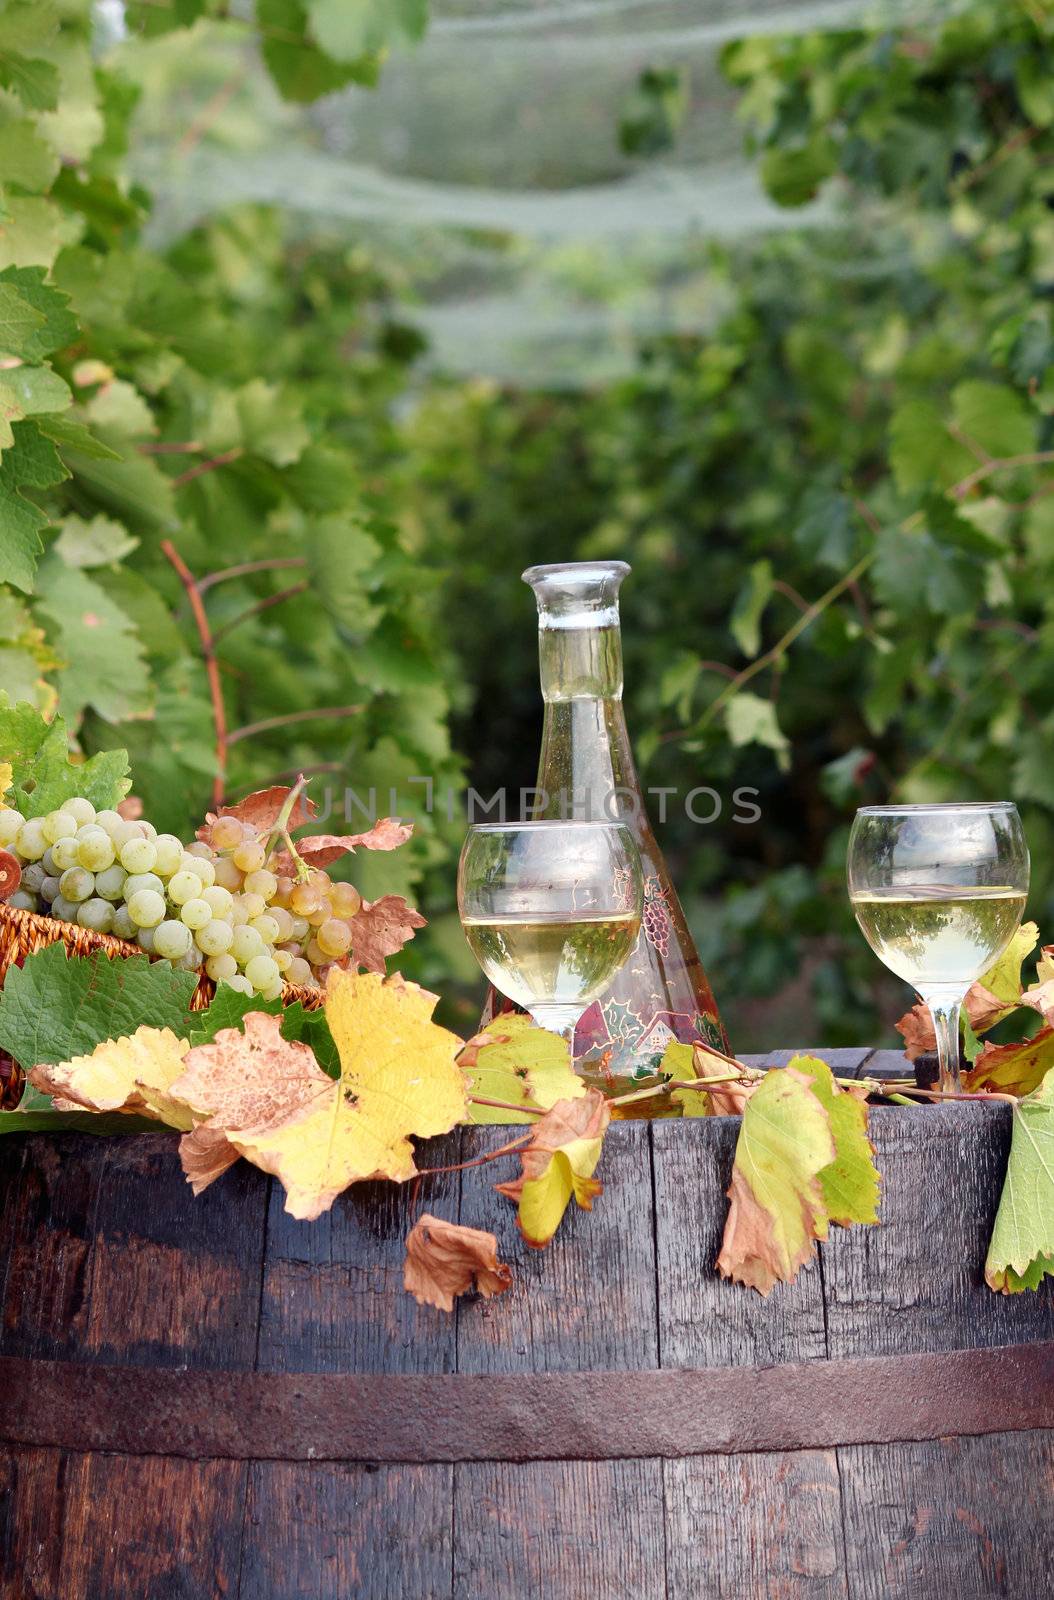 vineyard with white wine and old wooden barrel